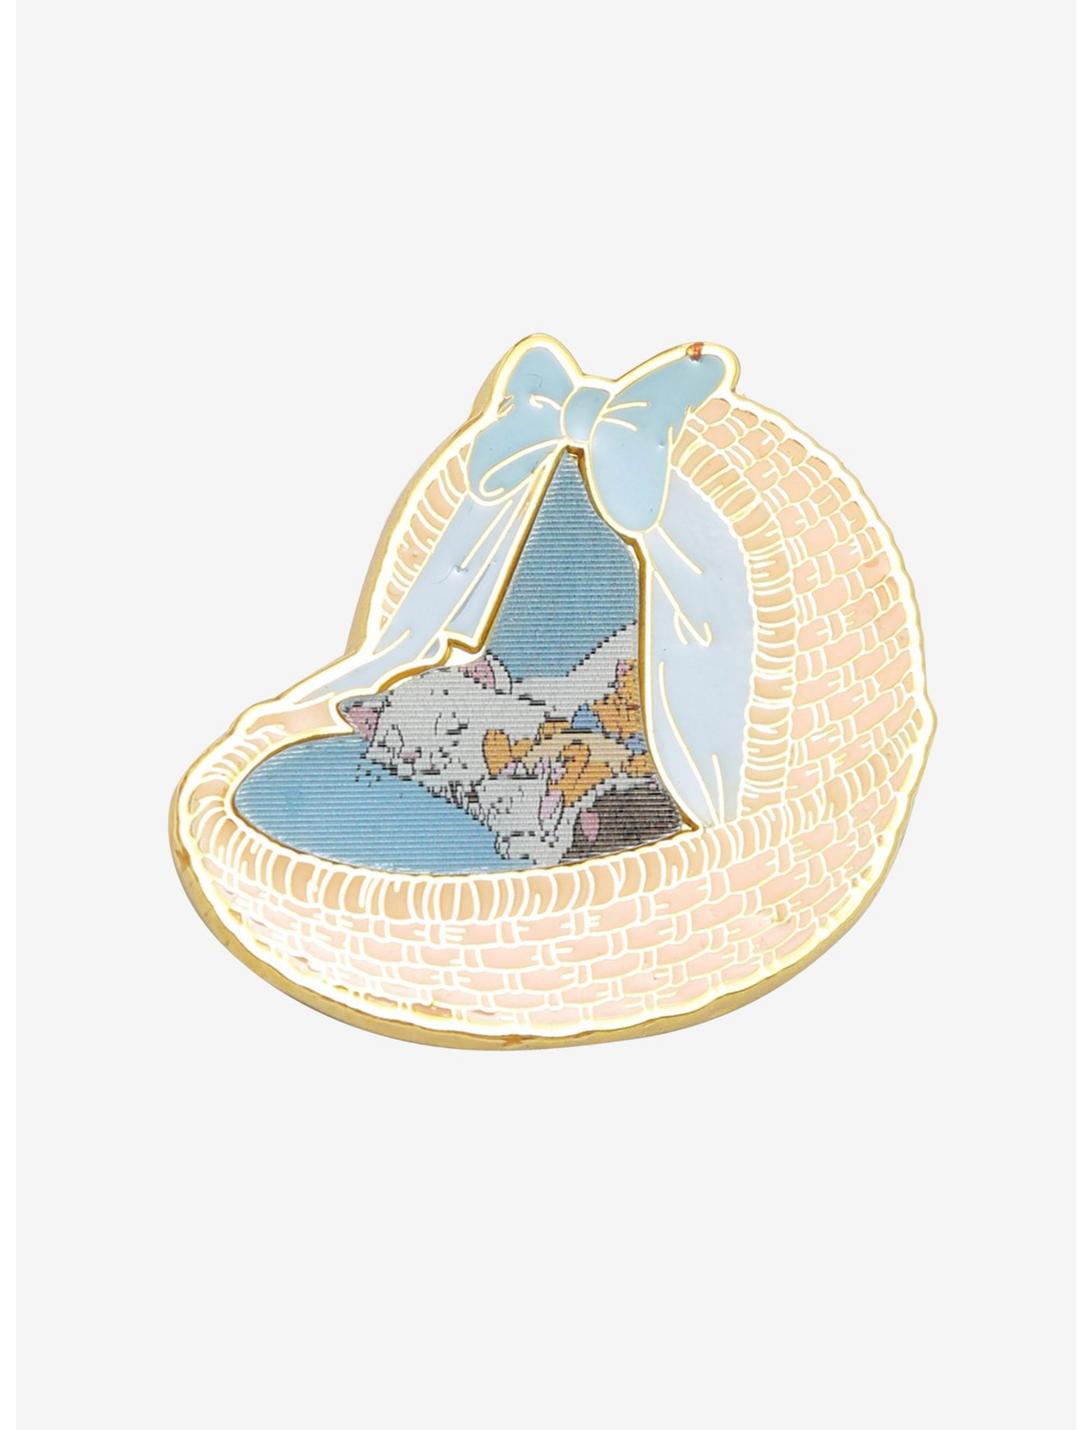 Loungefly Disney The Aristocats Duchess Kids Catnap Lenticular Enamel Pin - BoxLunch Exclusive, , hi-res